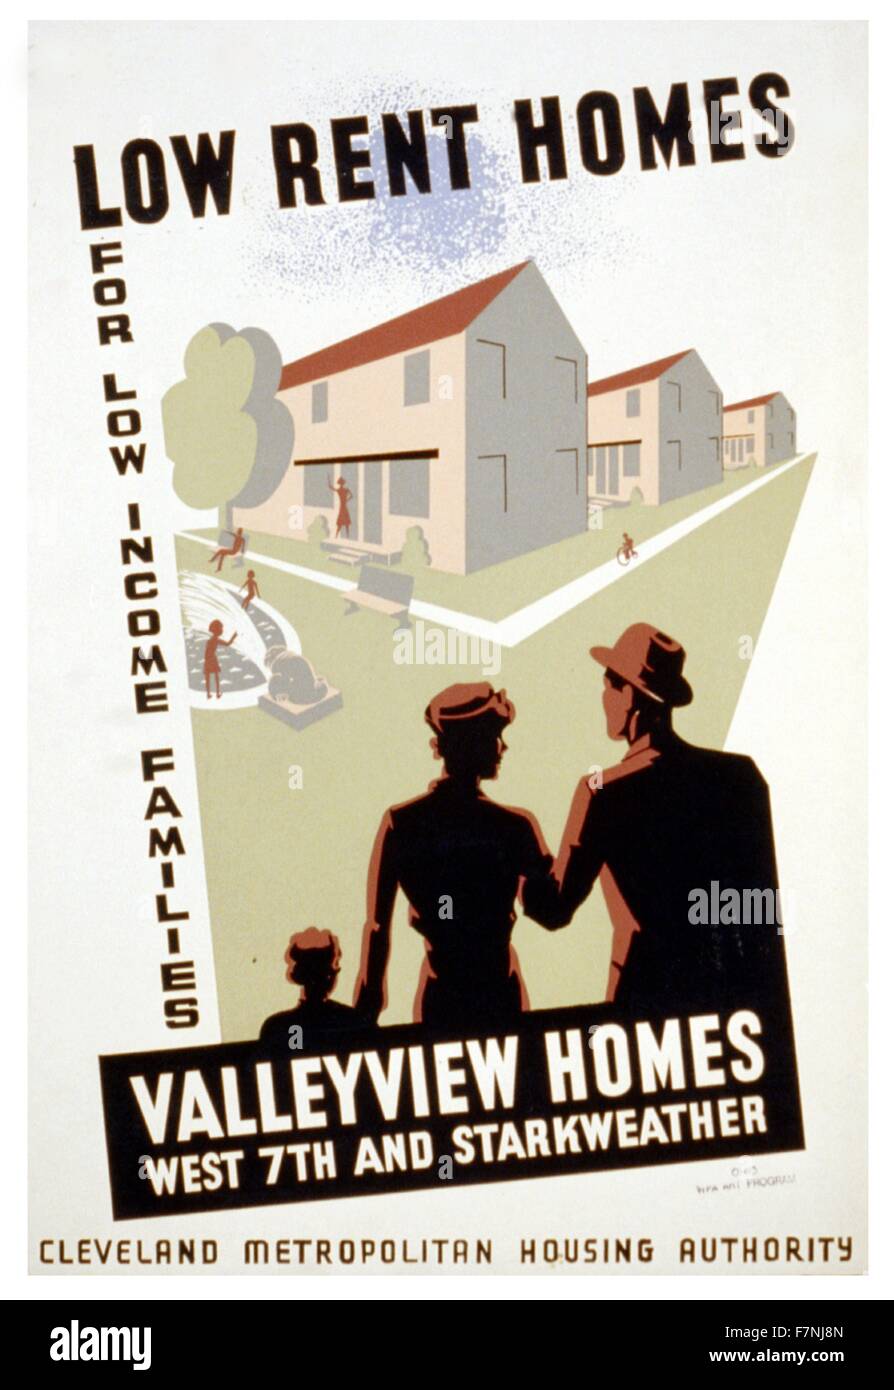 Poster for Cleveland Metropolitan Housing Authority announcing new low income housing development, showing family looking at new homes Stock Photo